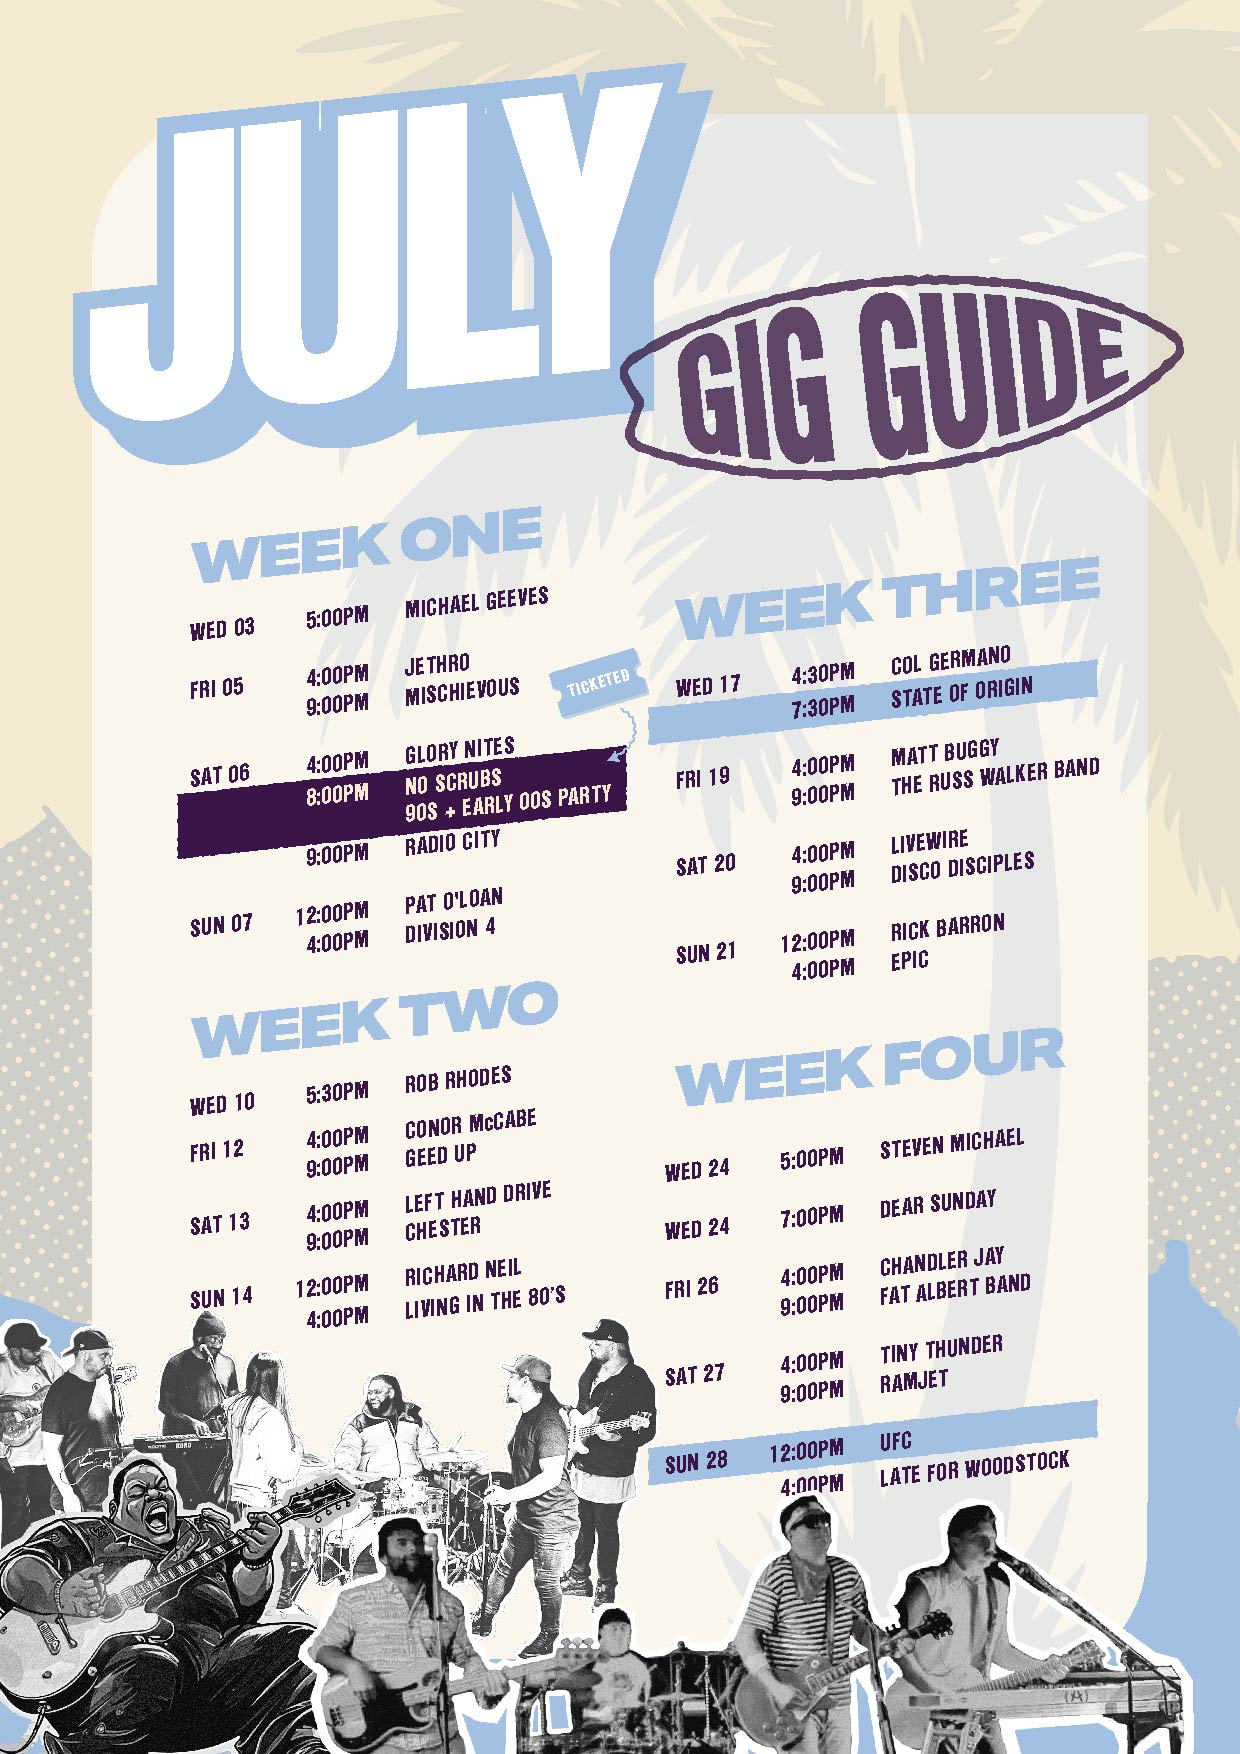 Cooly Gig Guide - July